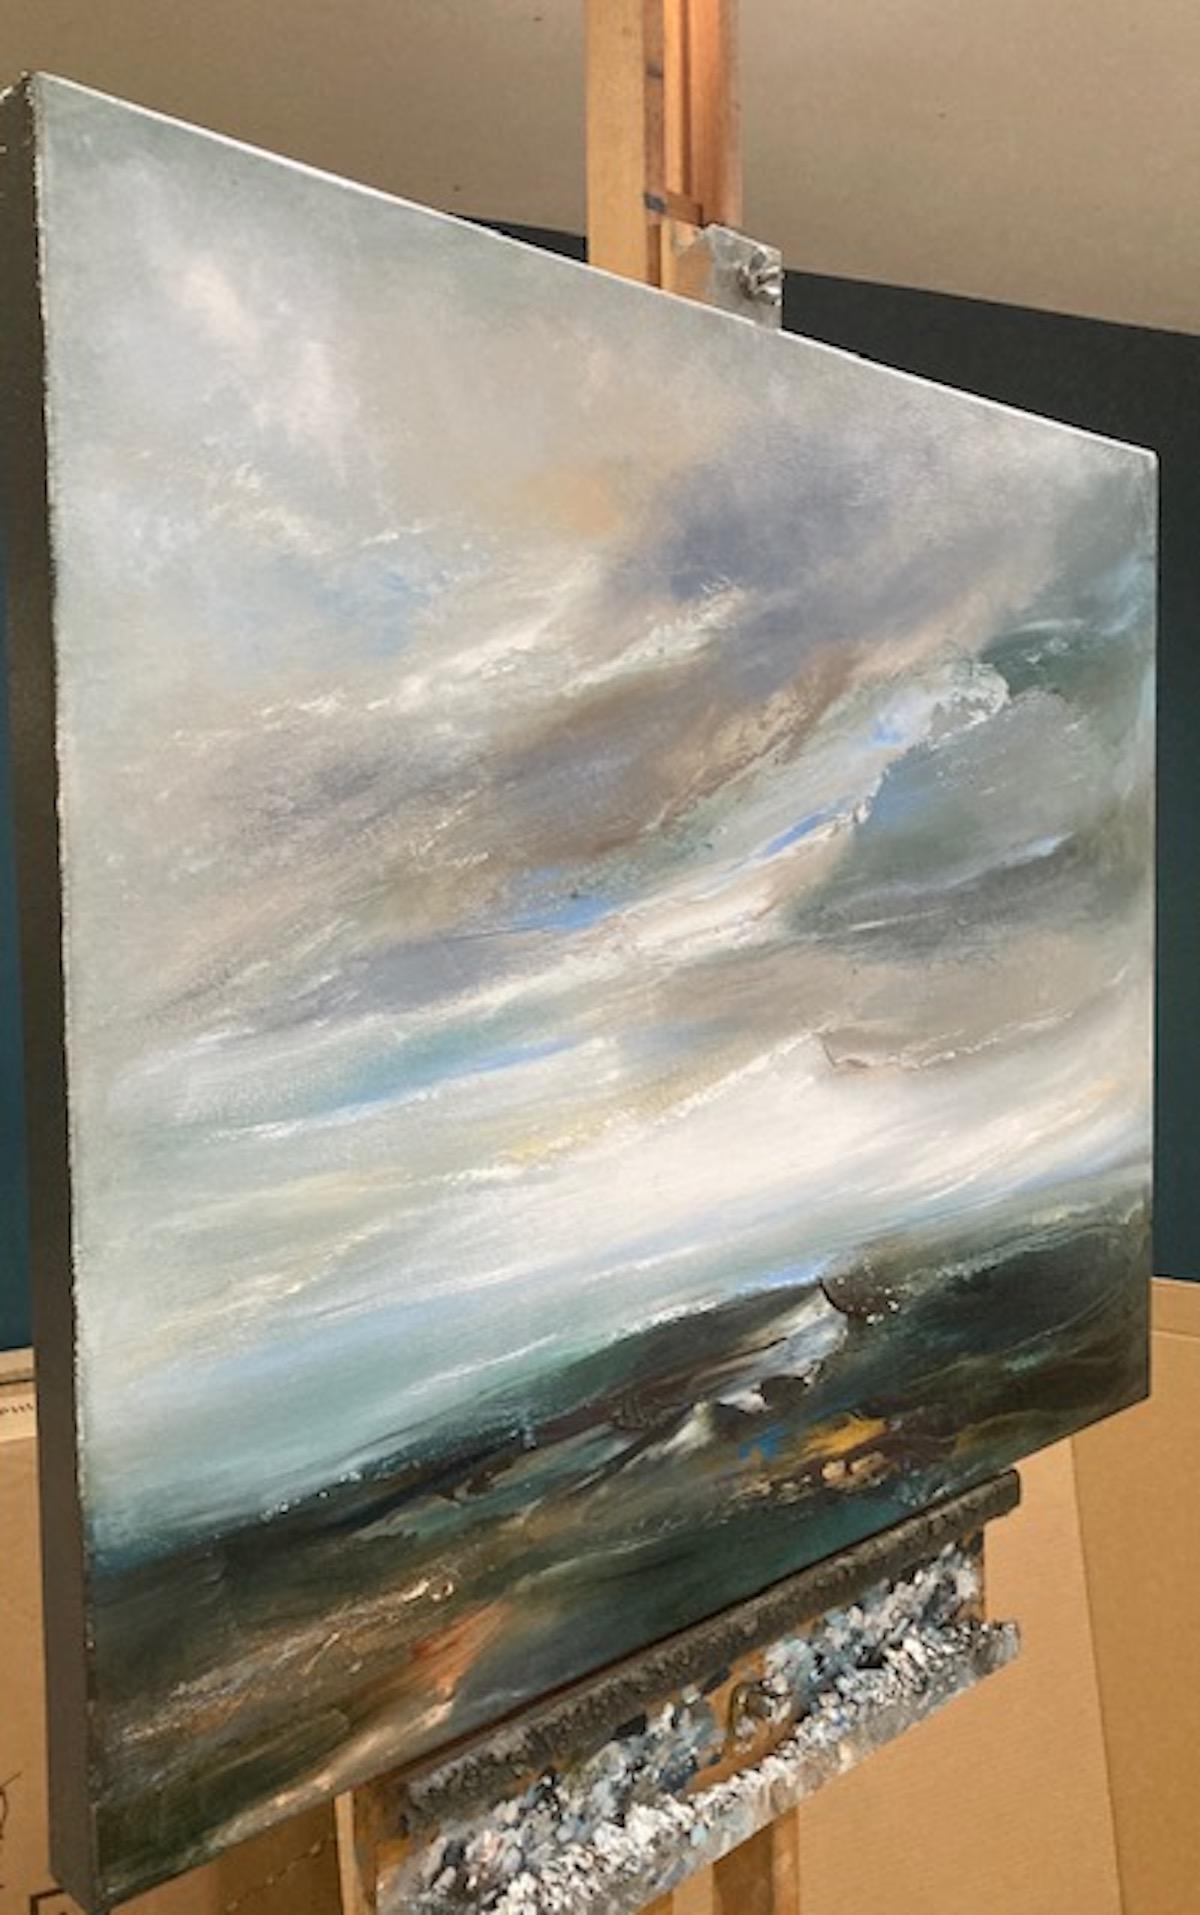 Coastal Shifting Light by Helen Howells [2022]
original and hand signed by the artist 
Oil on Canvas
Image size: H:61 cm x W:76 cm
Complete Size of Unframed Work: H:61 cm x W:76 cm x D:3.5cm
Sold Unframed
Please note that insitu images are purely an